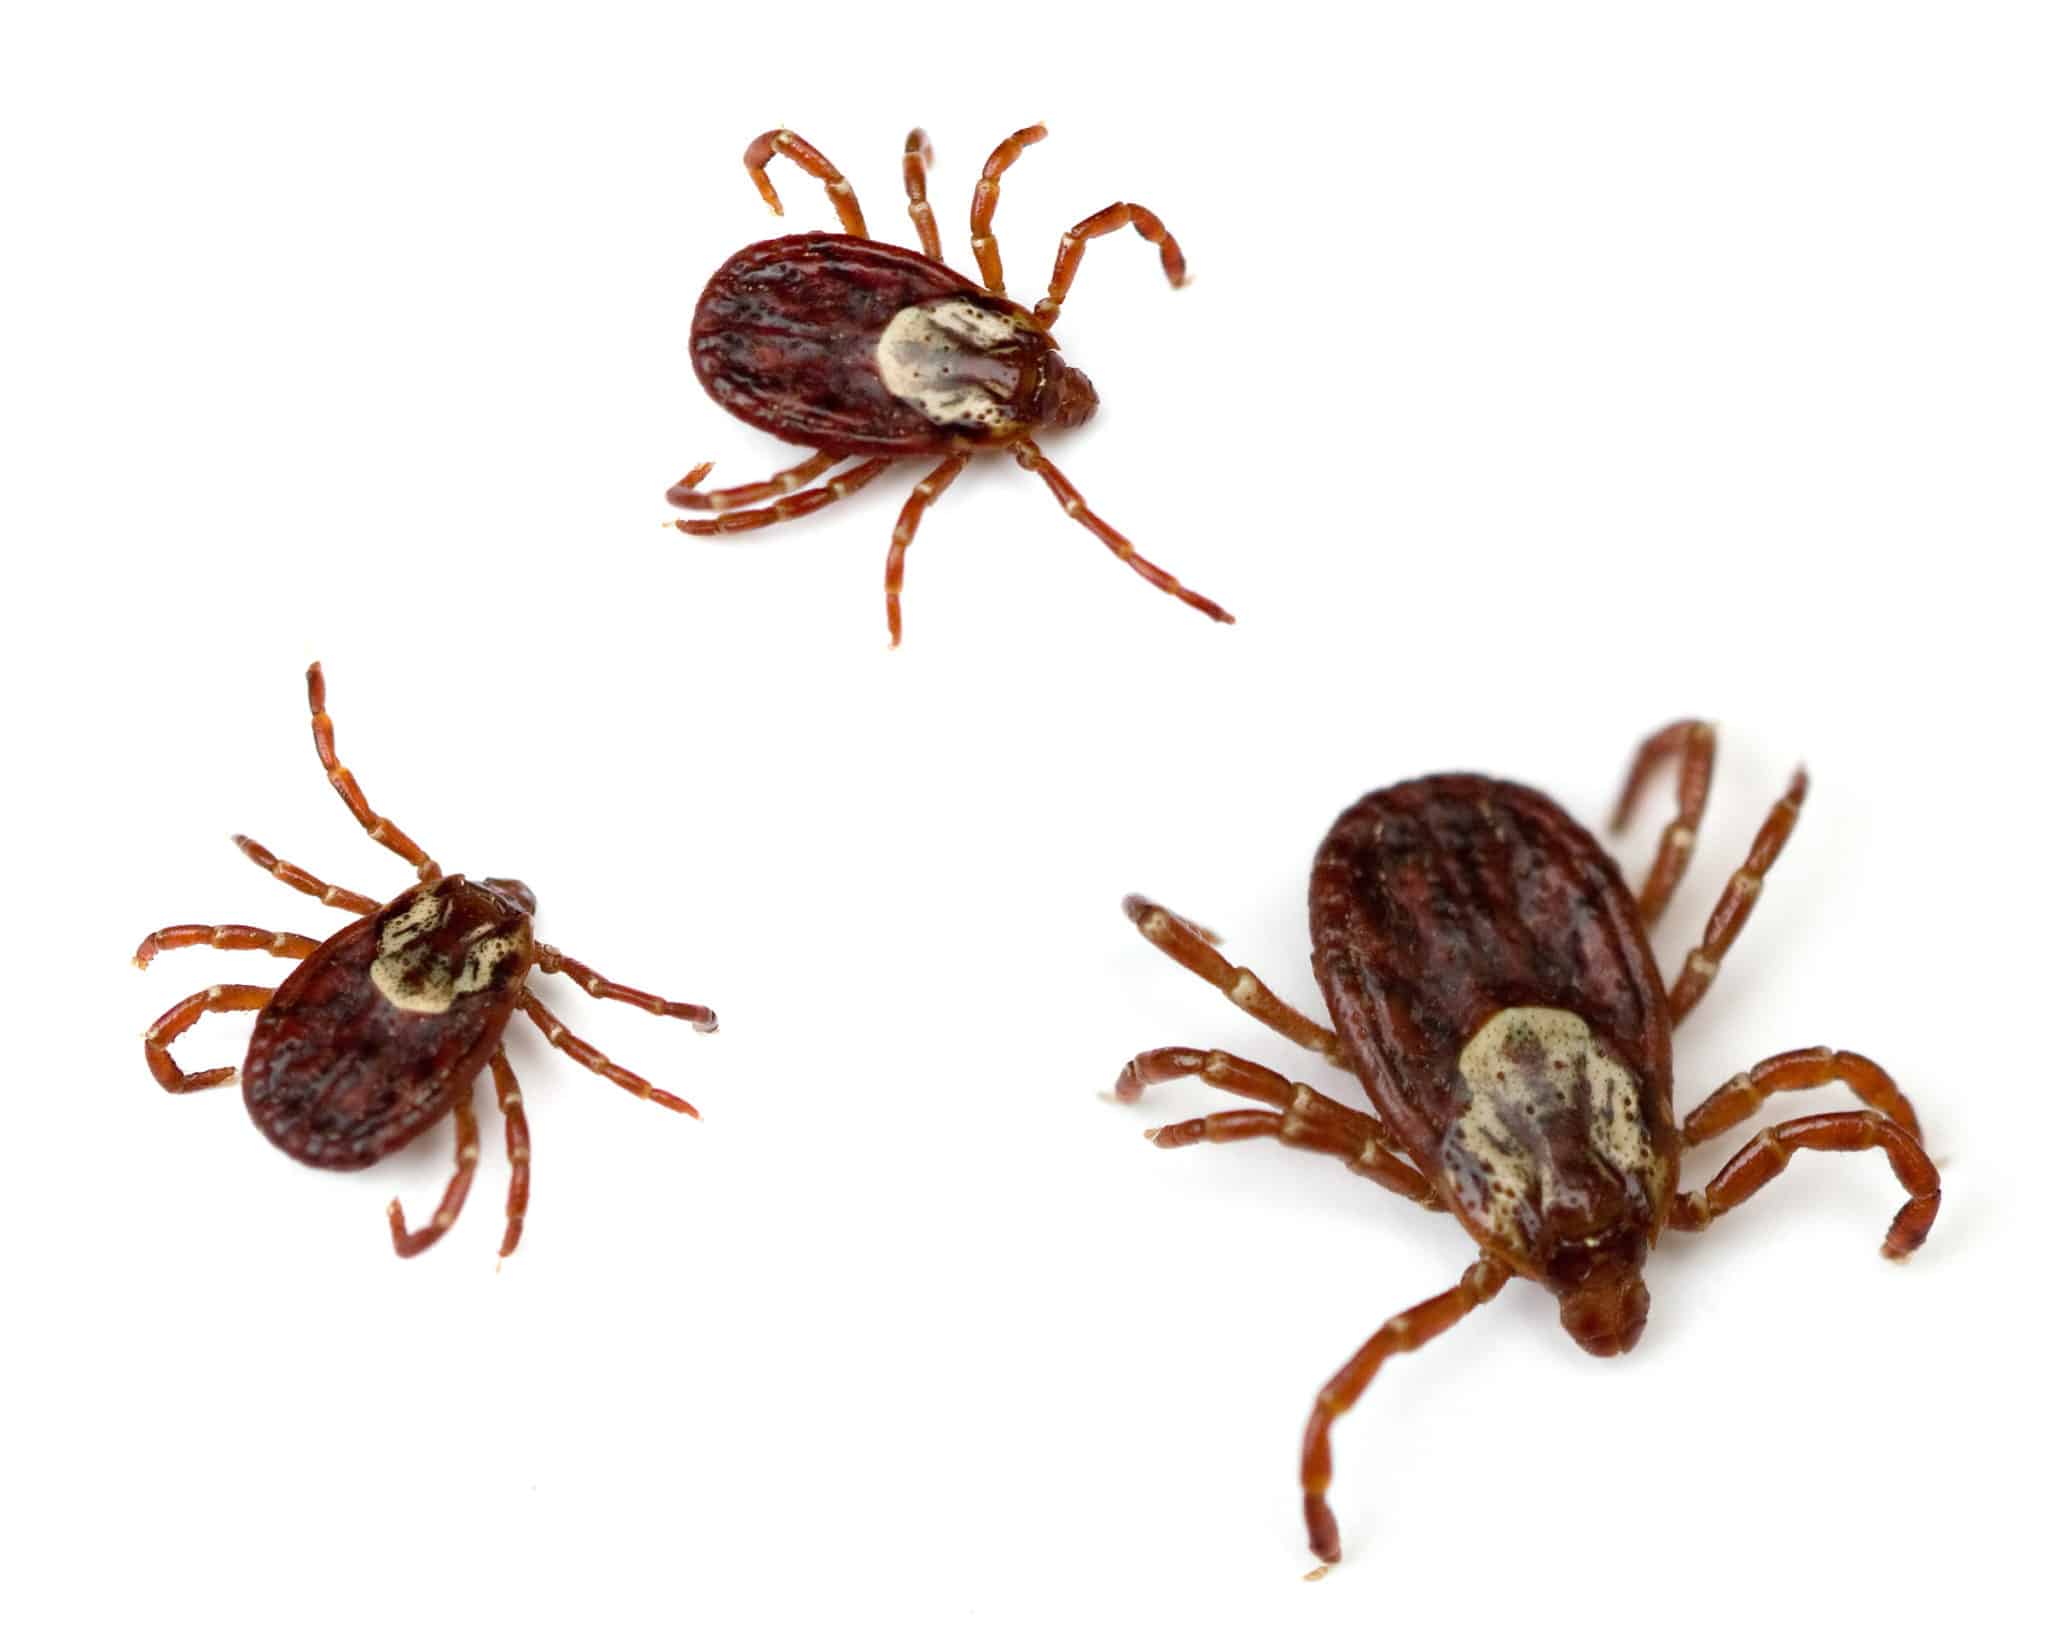 can ticks cause vomiting in dogs